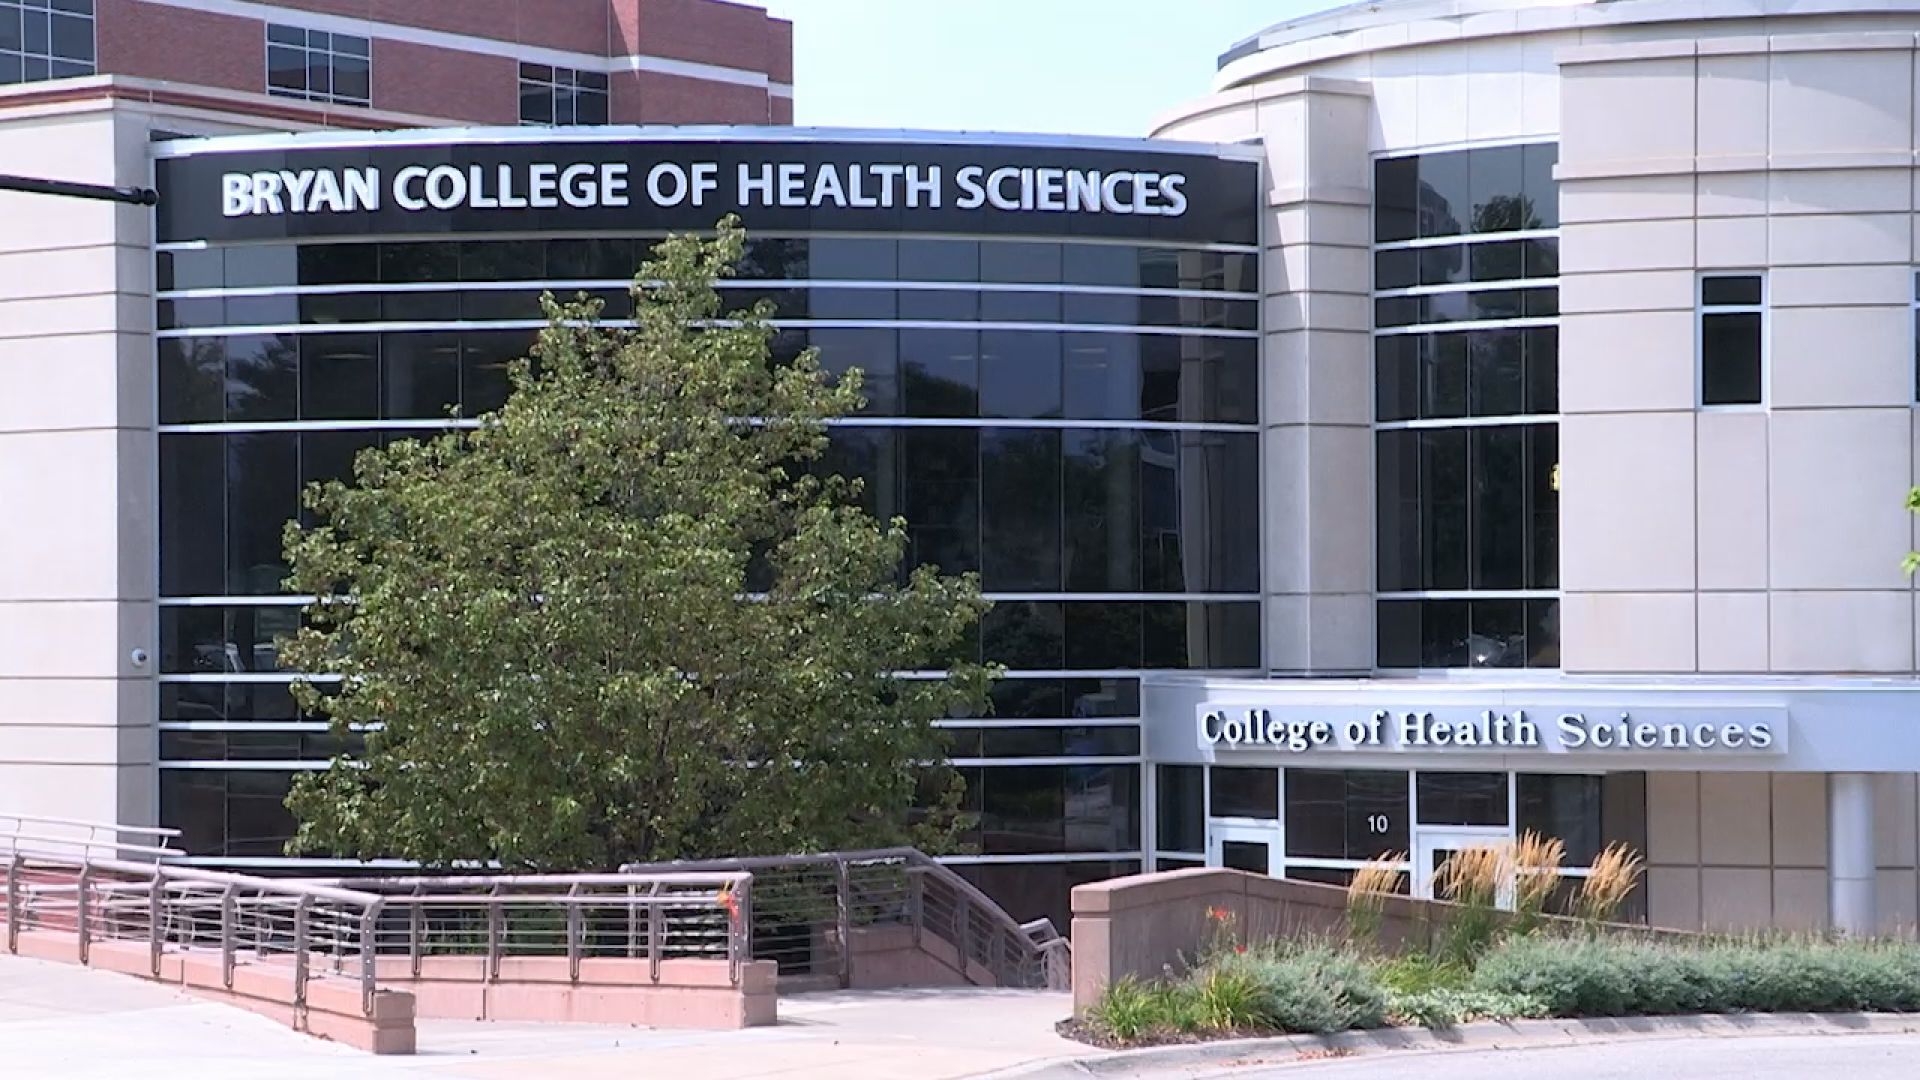 Bryan College of Health Sciences partnering with Hastings College